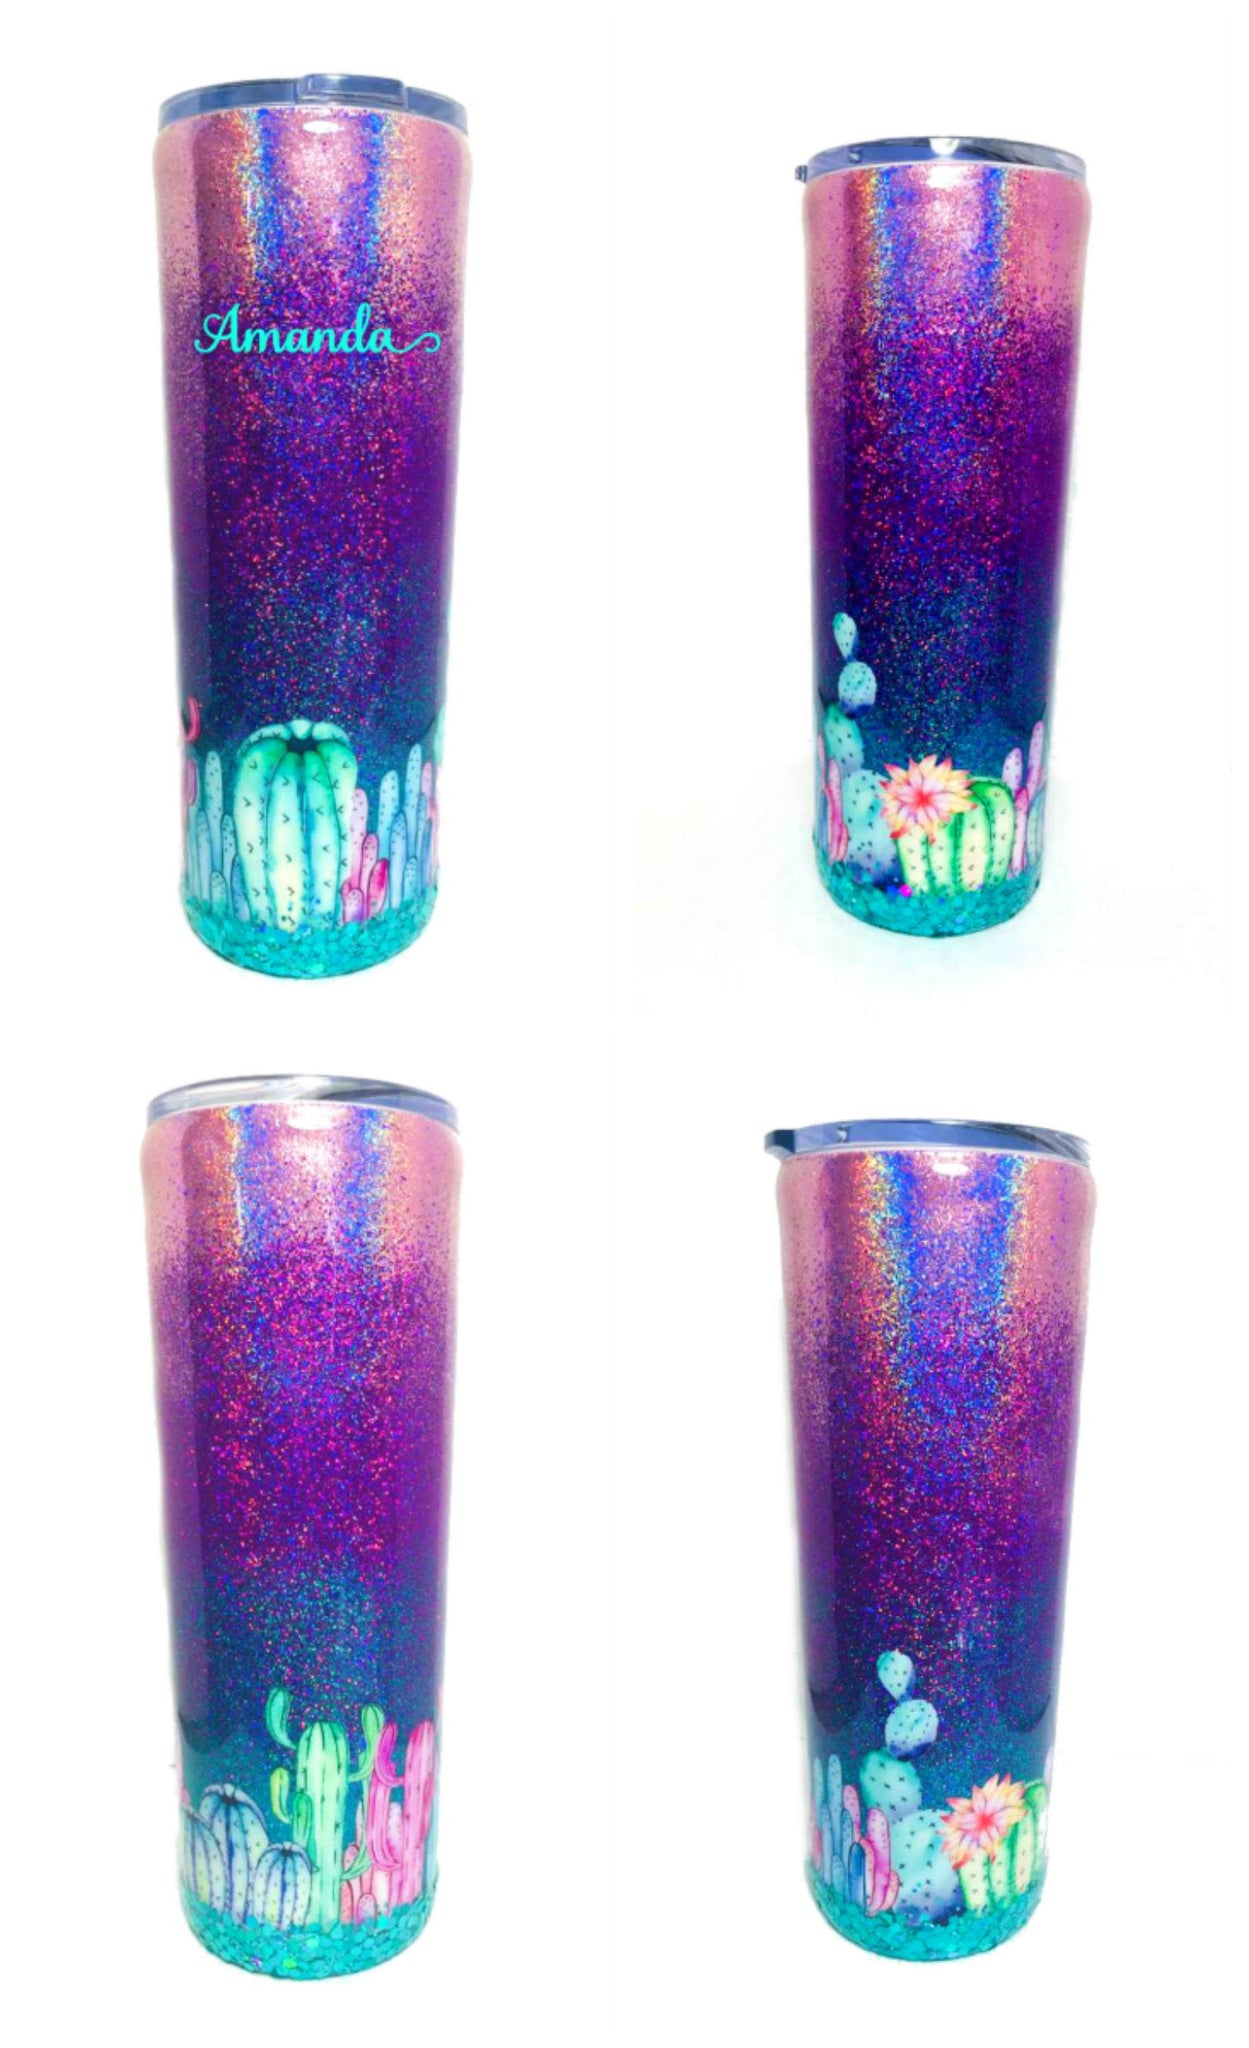 20 oz Skinny Holographic Glitter Insulated Tumbler Laser Engraved